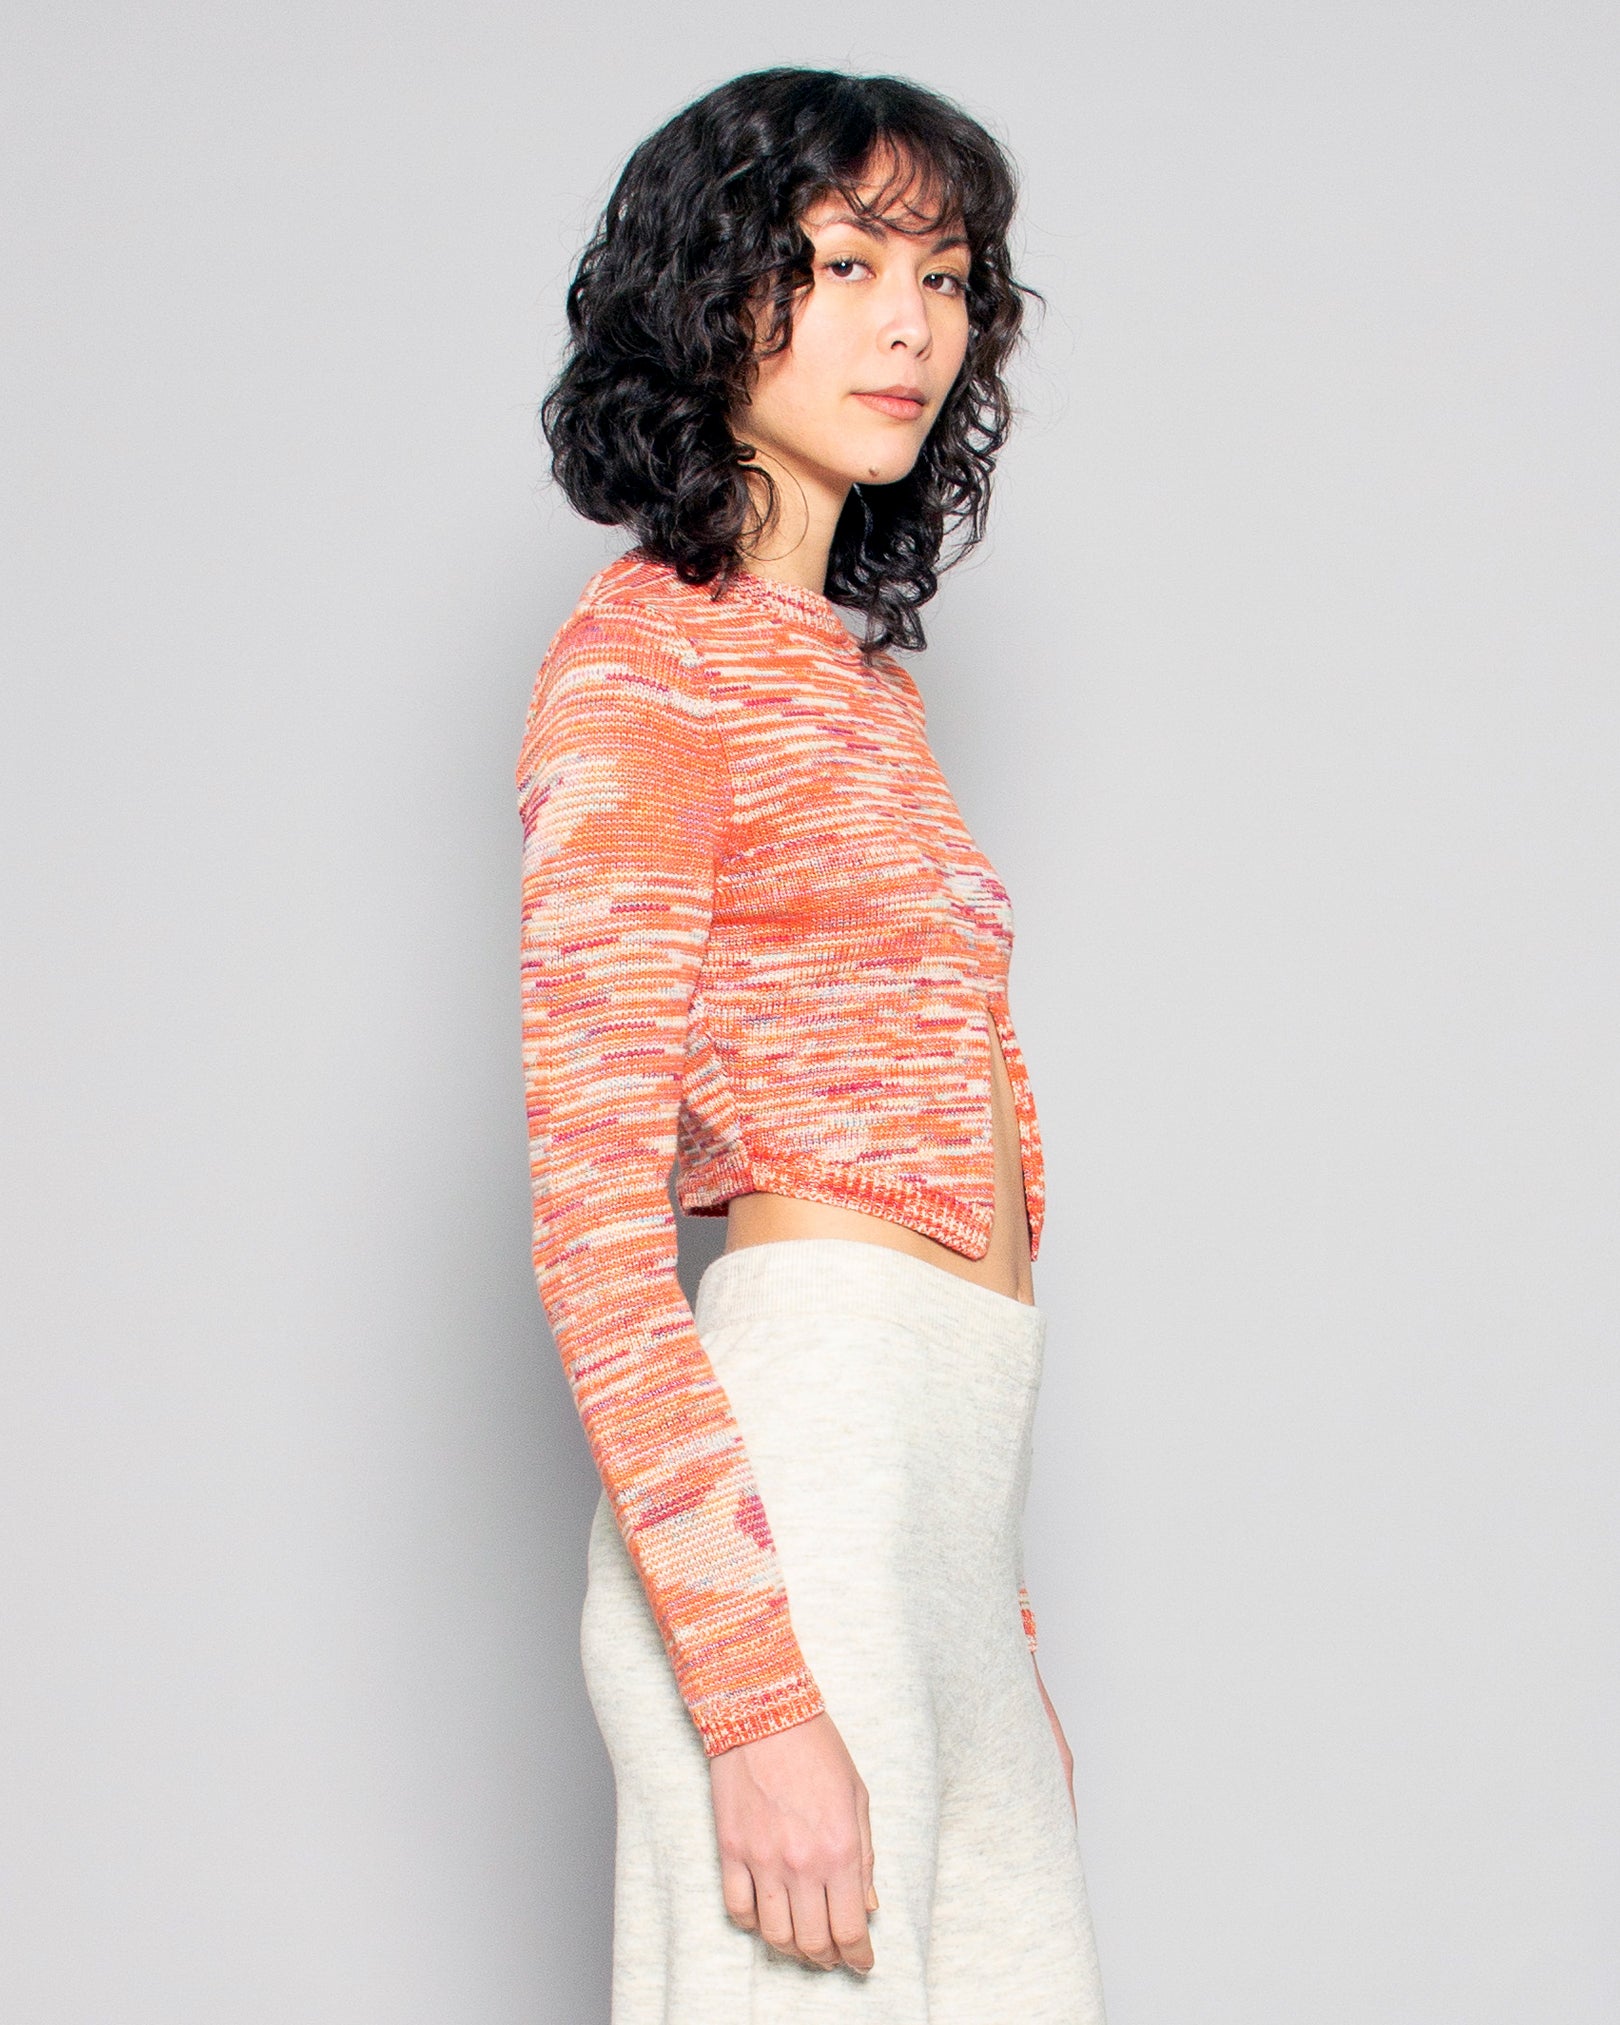 PERSONS Wess Split Front Crop Top in Creamsicle available at Lahn.shop